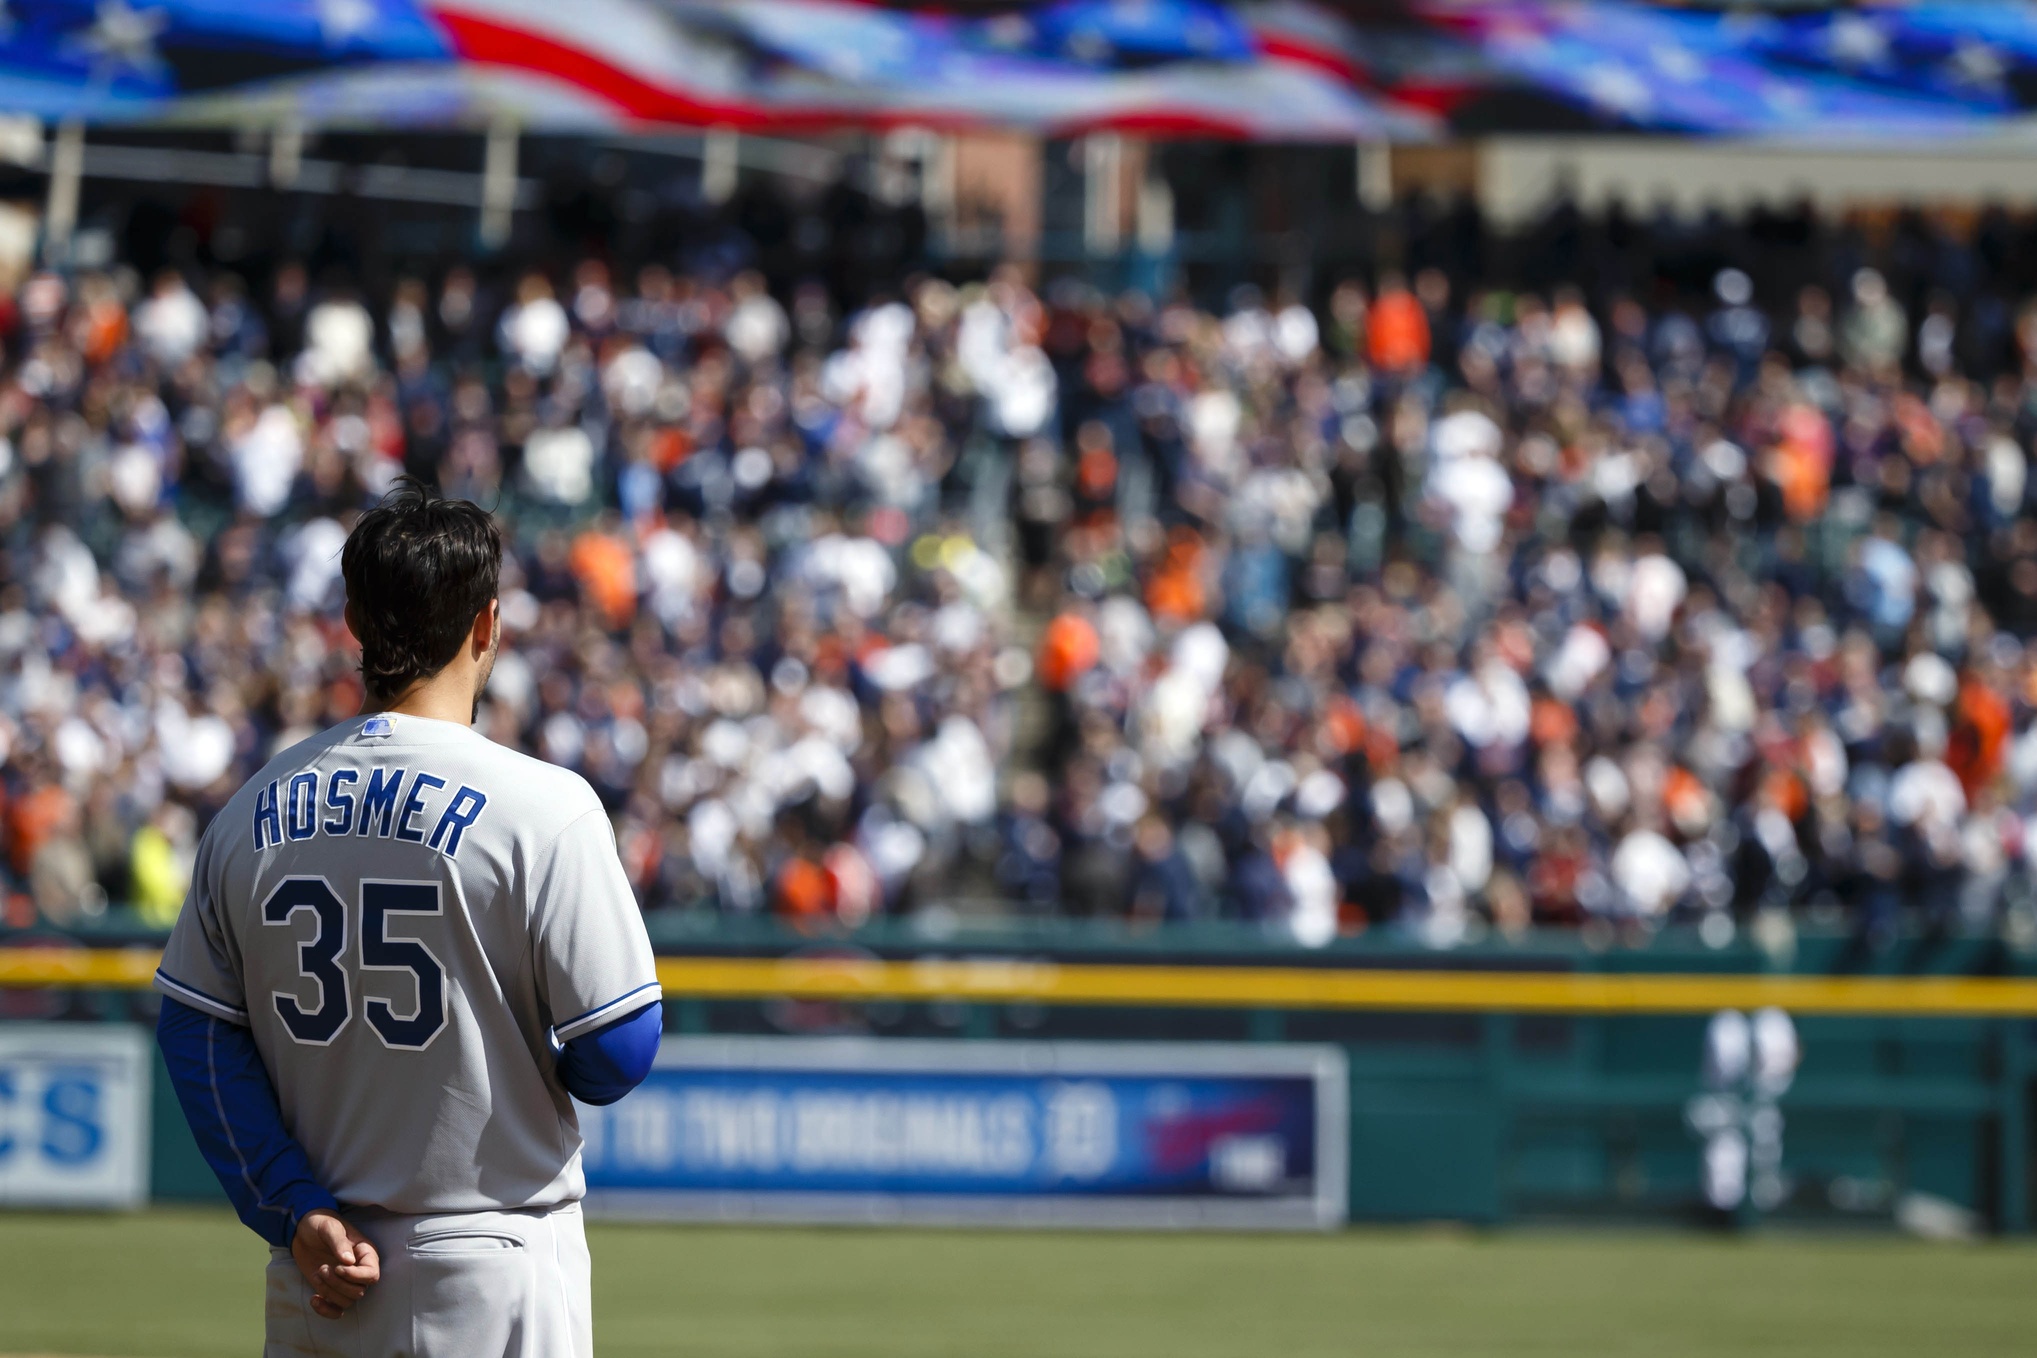 Mar 31, 2014; Detroit, MI, USA; Kansas City Royals first baseman Eric Hosmer (35) during the singing of God Bless America in seventh inning stretch of an opening day baseball game against the Detroit Tigers at Comerica Park. Detroit won 4-3. Mandatory Credit: Rick Osentoski-USA TODAY Sports